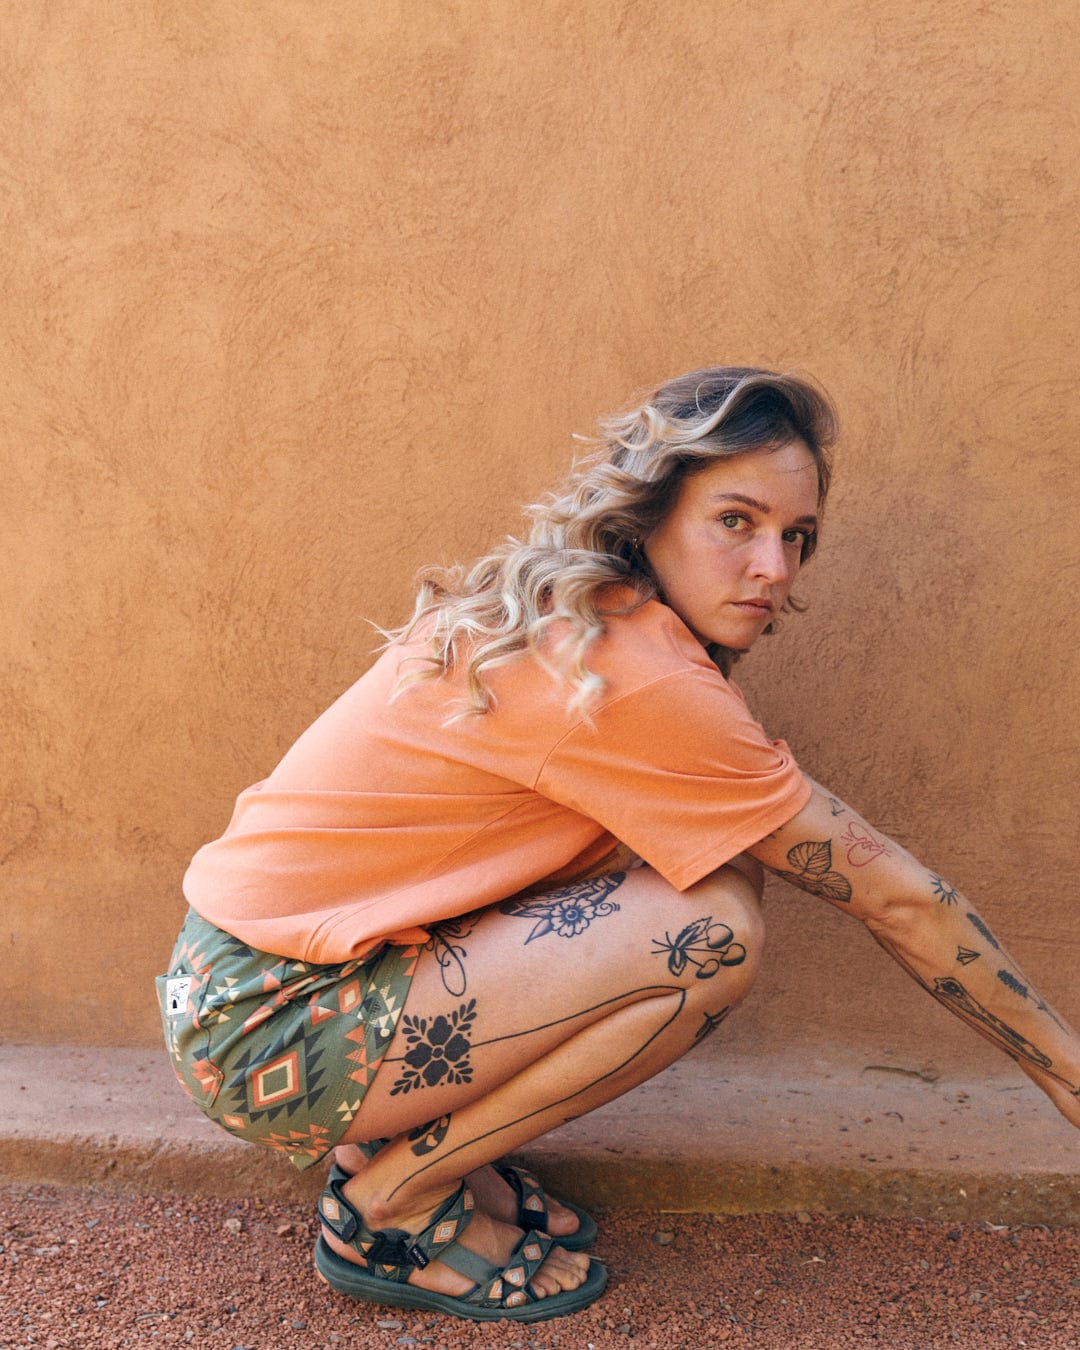 A person with tattoos on their arms and legs, sporting a Saltrock Sunshine - Recycled Womens Cropped T-Shirt - Orange, squats against an orange textured wall. They have shoulder-length wavy hair, patterned shorts, and sandals that add to the Saltrock branding vibe.